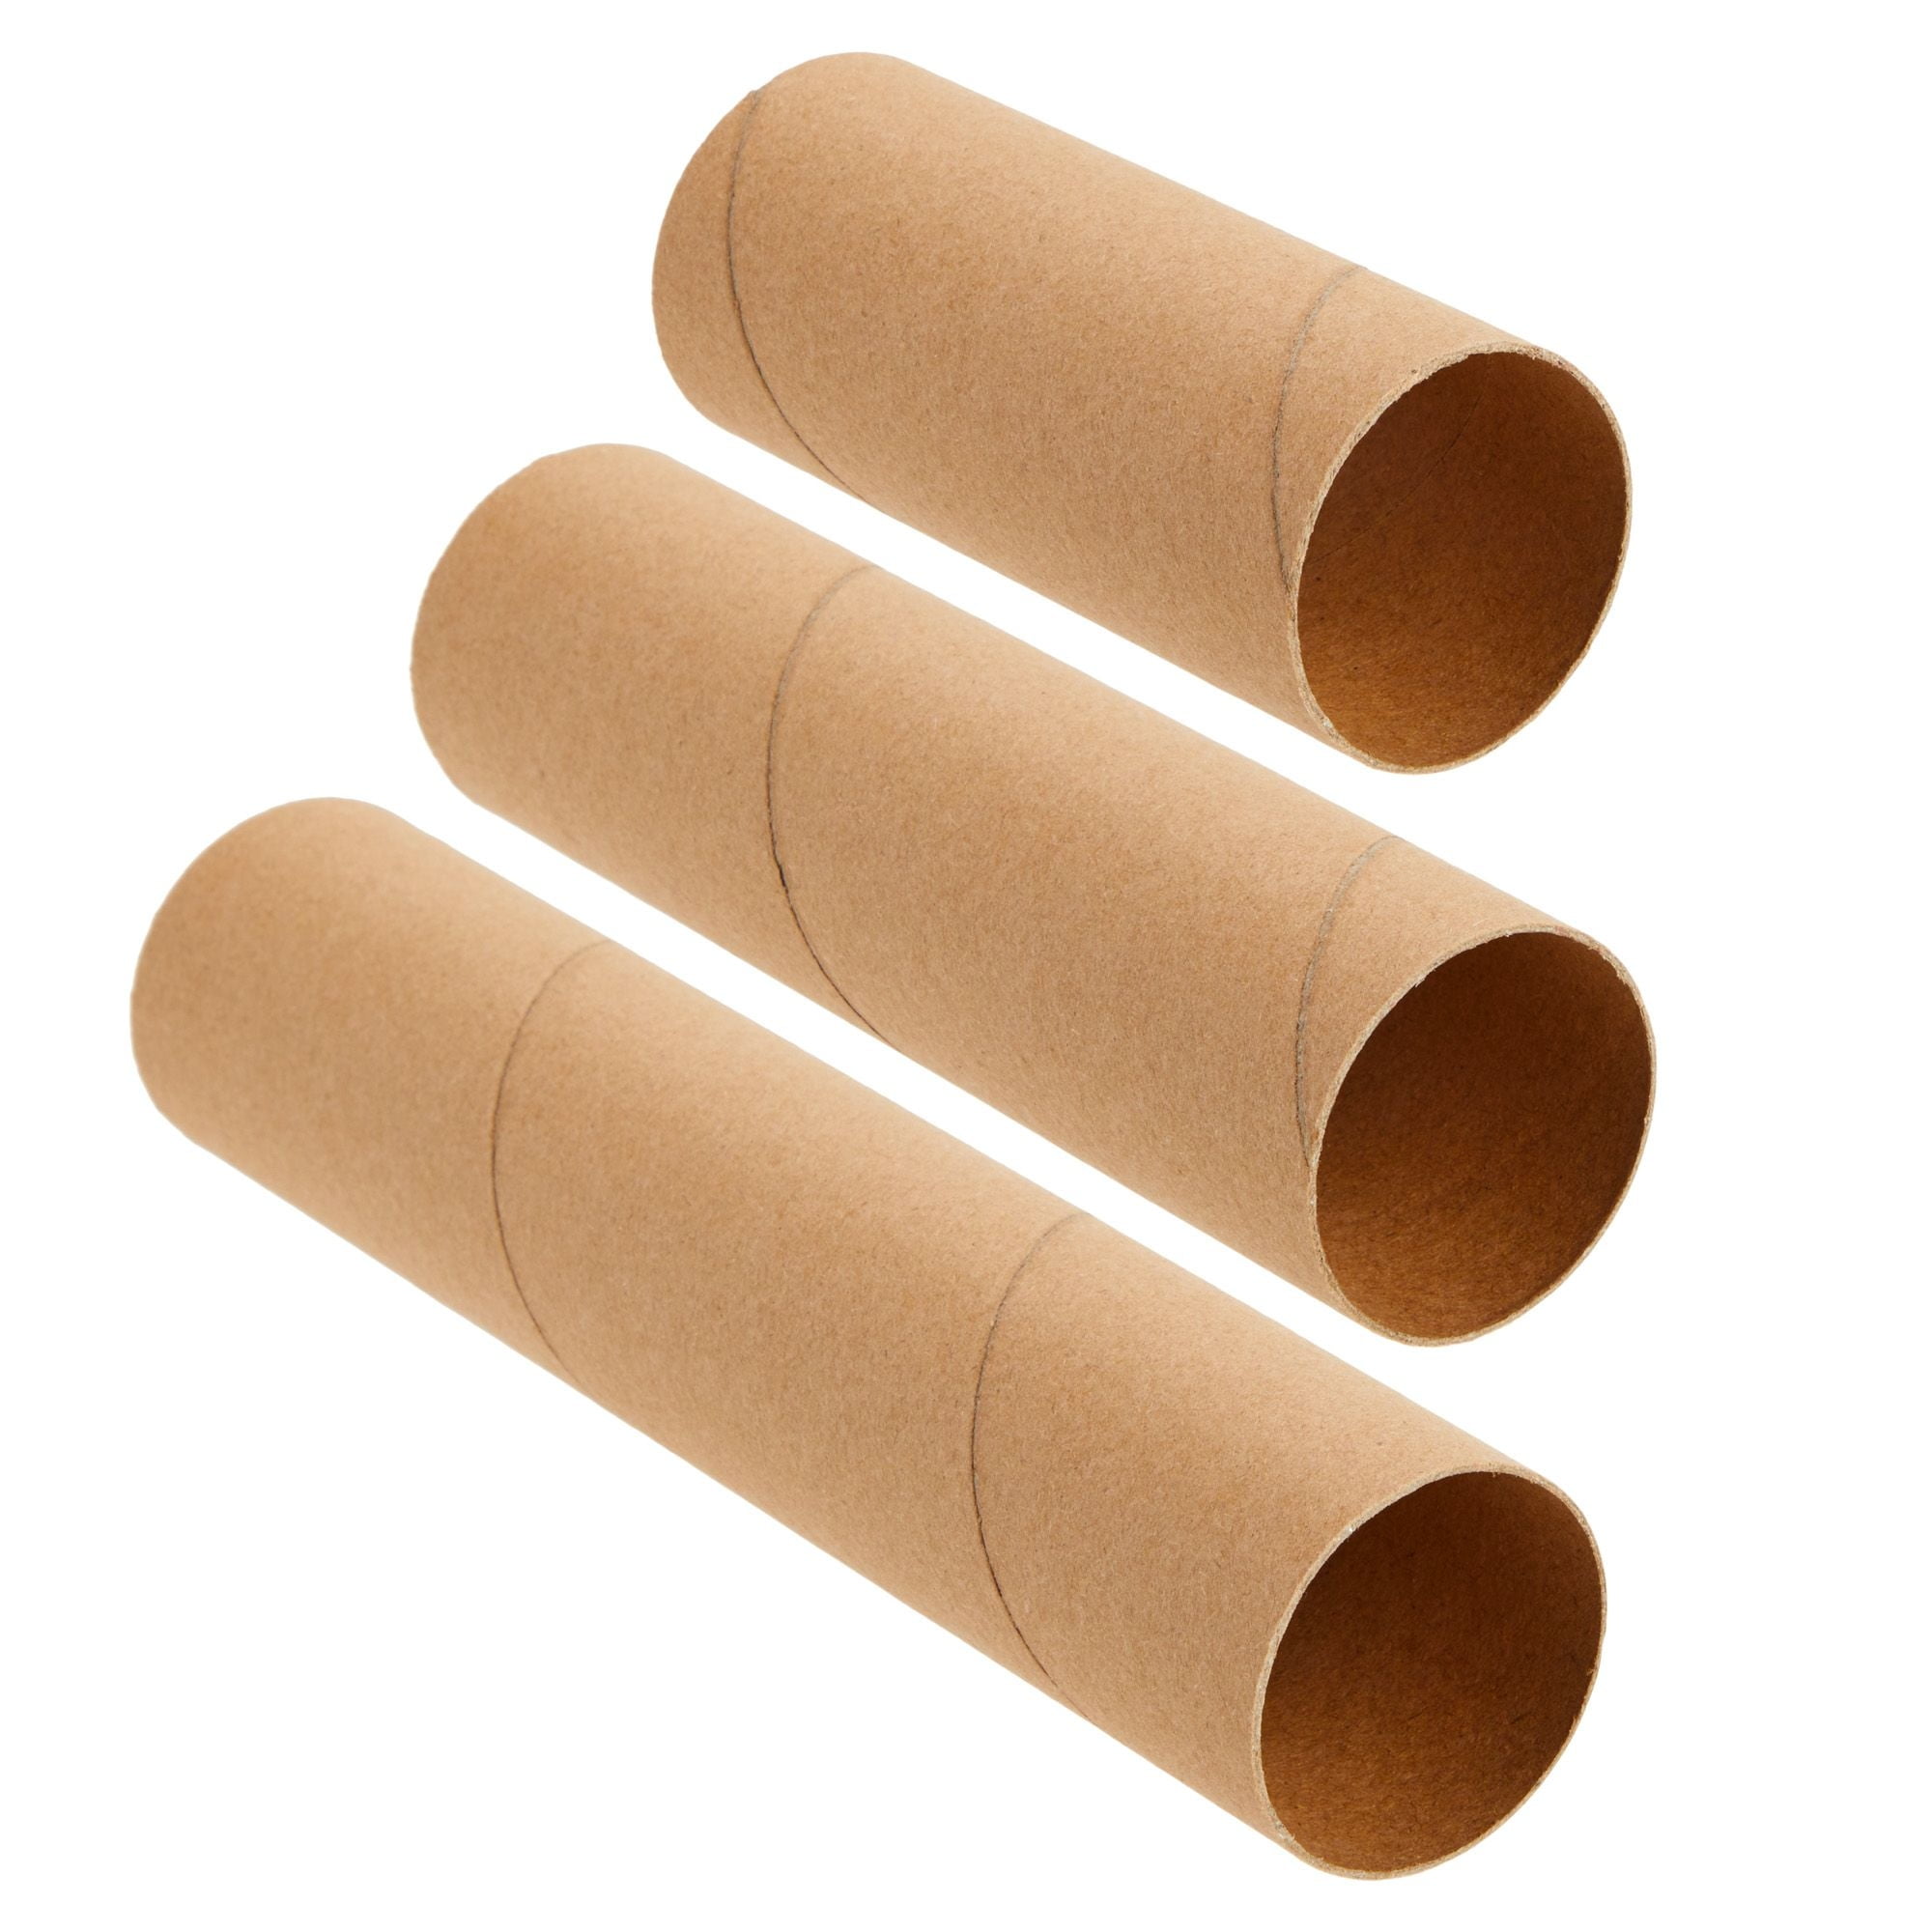 3.35 Inch Cardboard Tubes, 100 Pcs Toilet Paper Rolls for Crafts